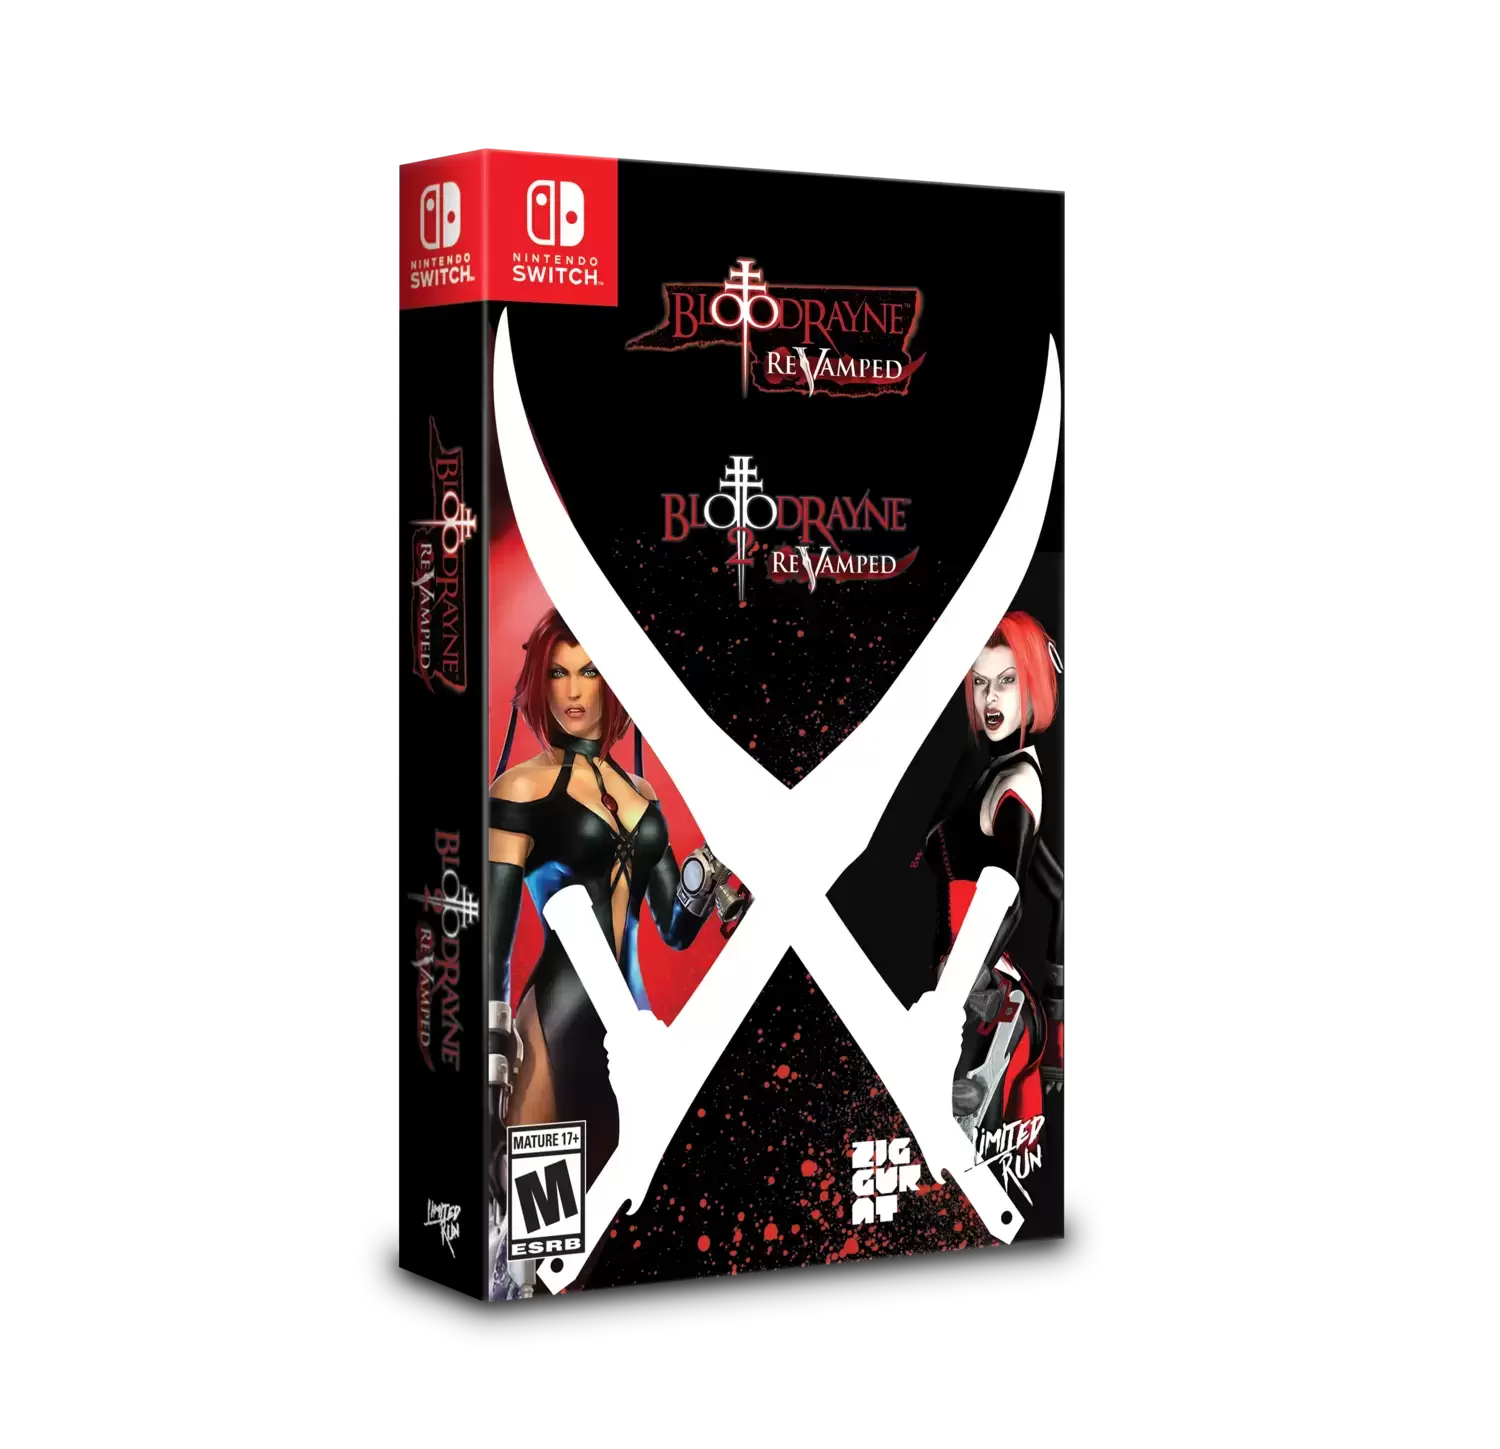 Nintendo Switch Games - Bloodrayne 1 & 2: Revamped - Dual Pack with Slipcover